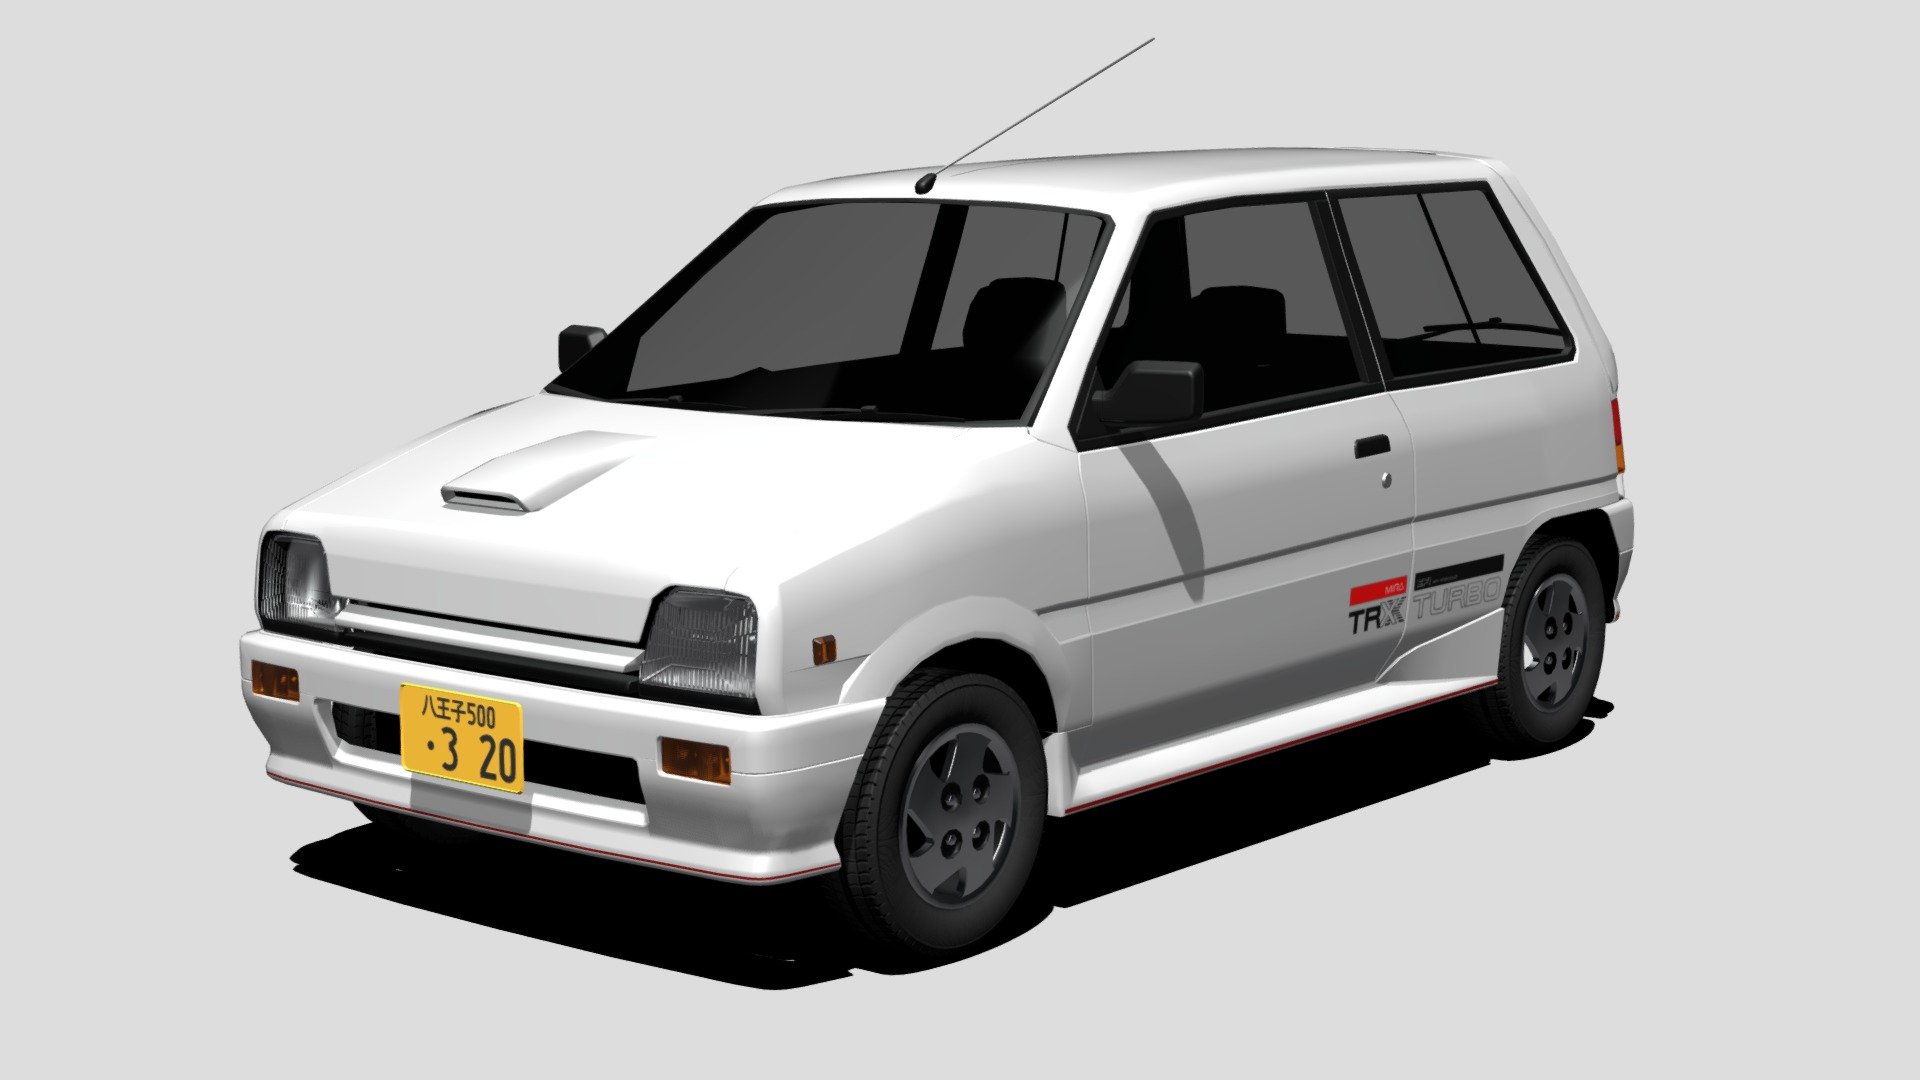 The TR-XX is a spicy version of Daihatsu's little Mira. It mechanically is the same as the Turbo but features new sporty bodykit including a hoodscoop, an double-lip rear spoiler, new bumpers and sideskirts and fancy alloys! It featured aswell a Turbocharged 550cc inline 3 and funky seats 3d model